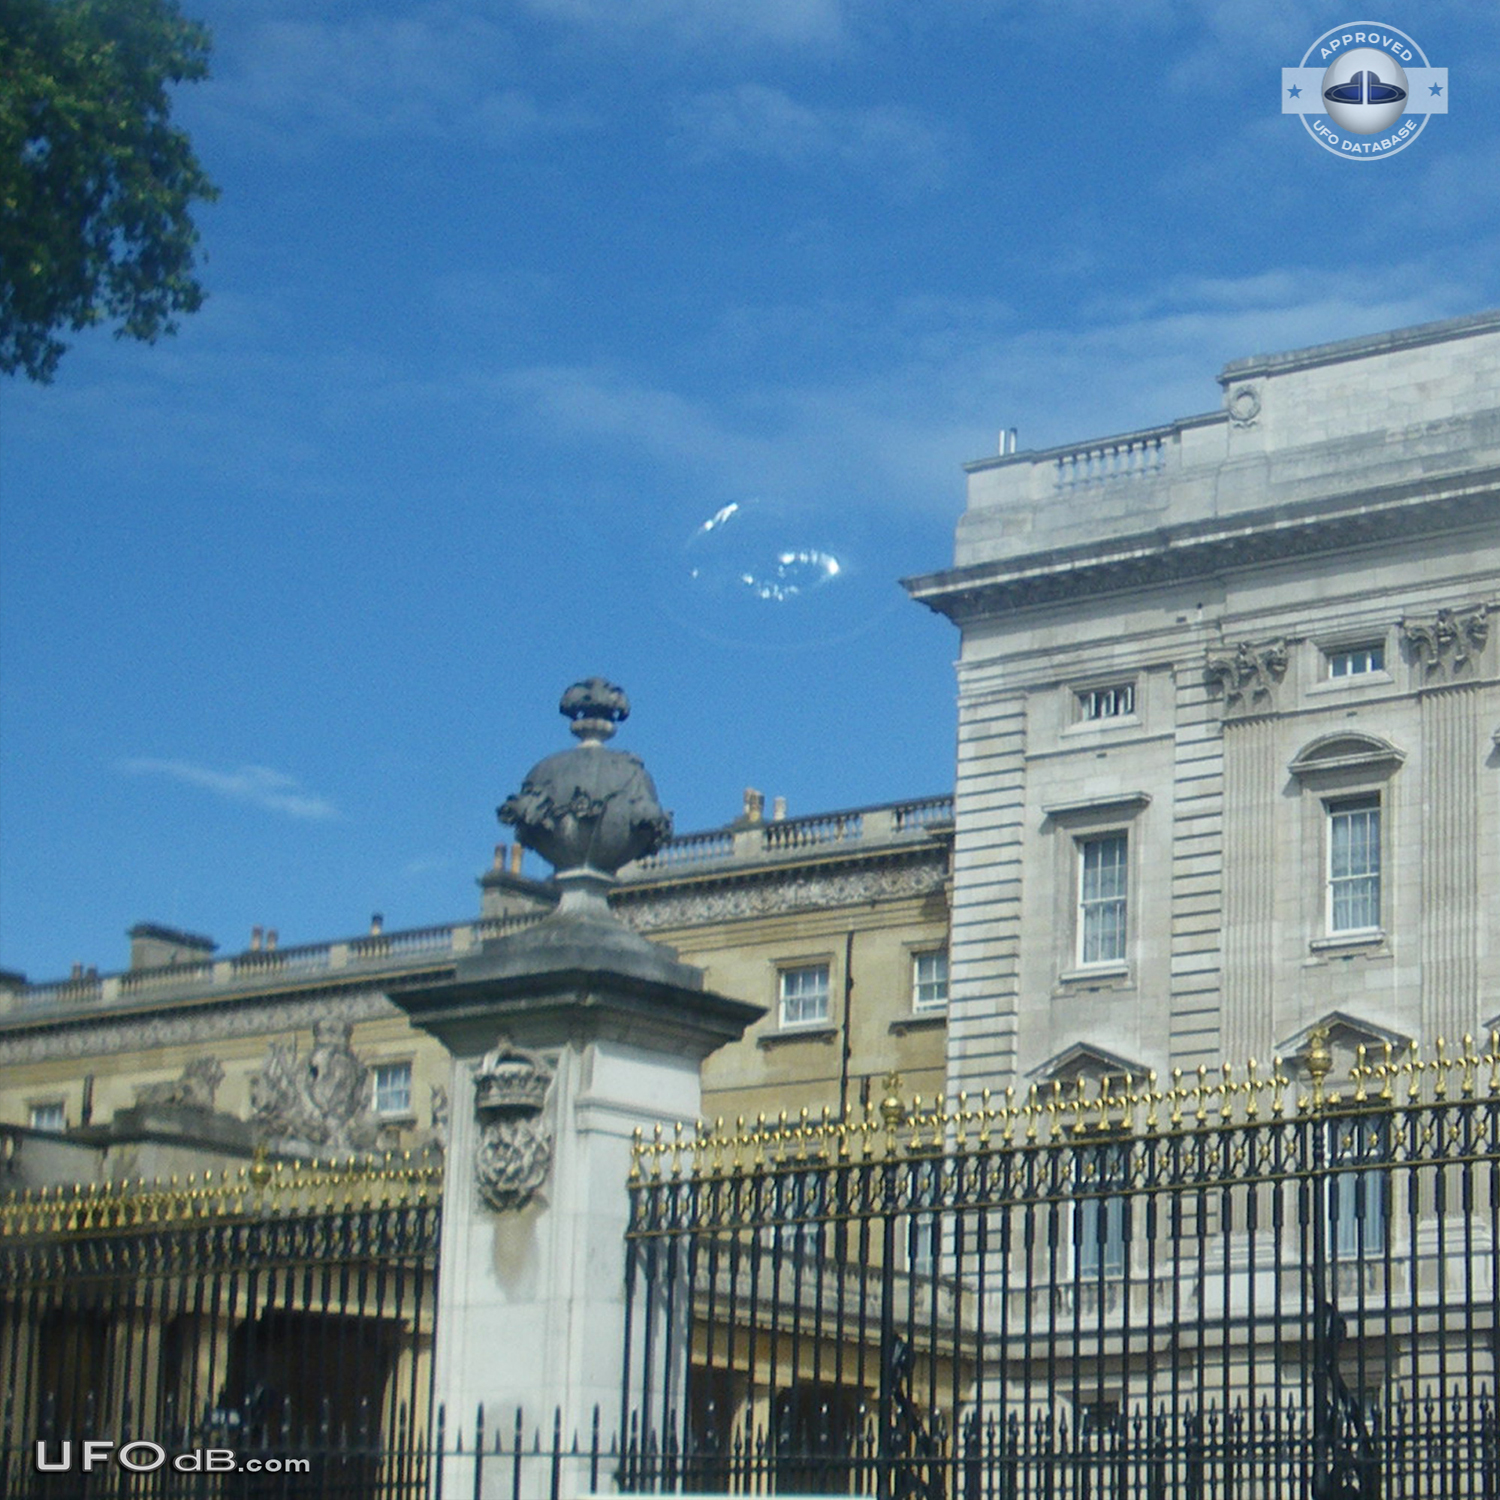 Strange ring UFO with clouds over Buckingham palace London UK 2012 UFO Picture #525-1